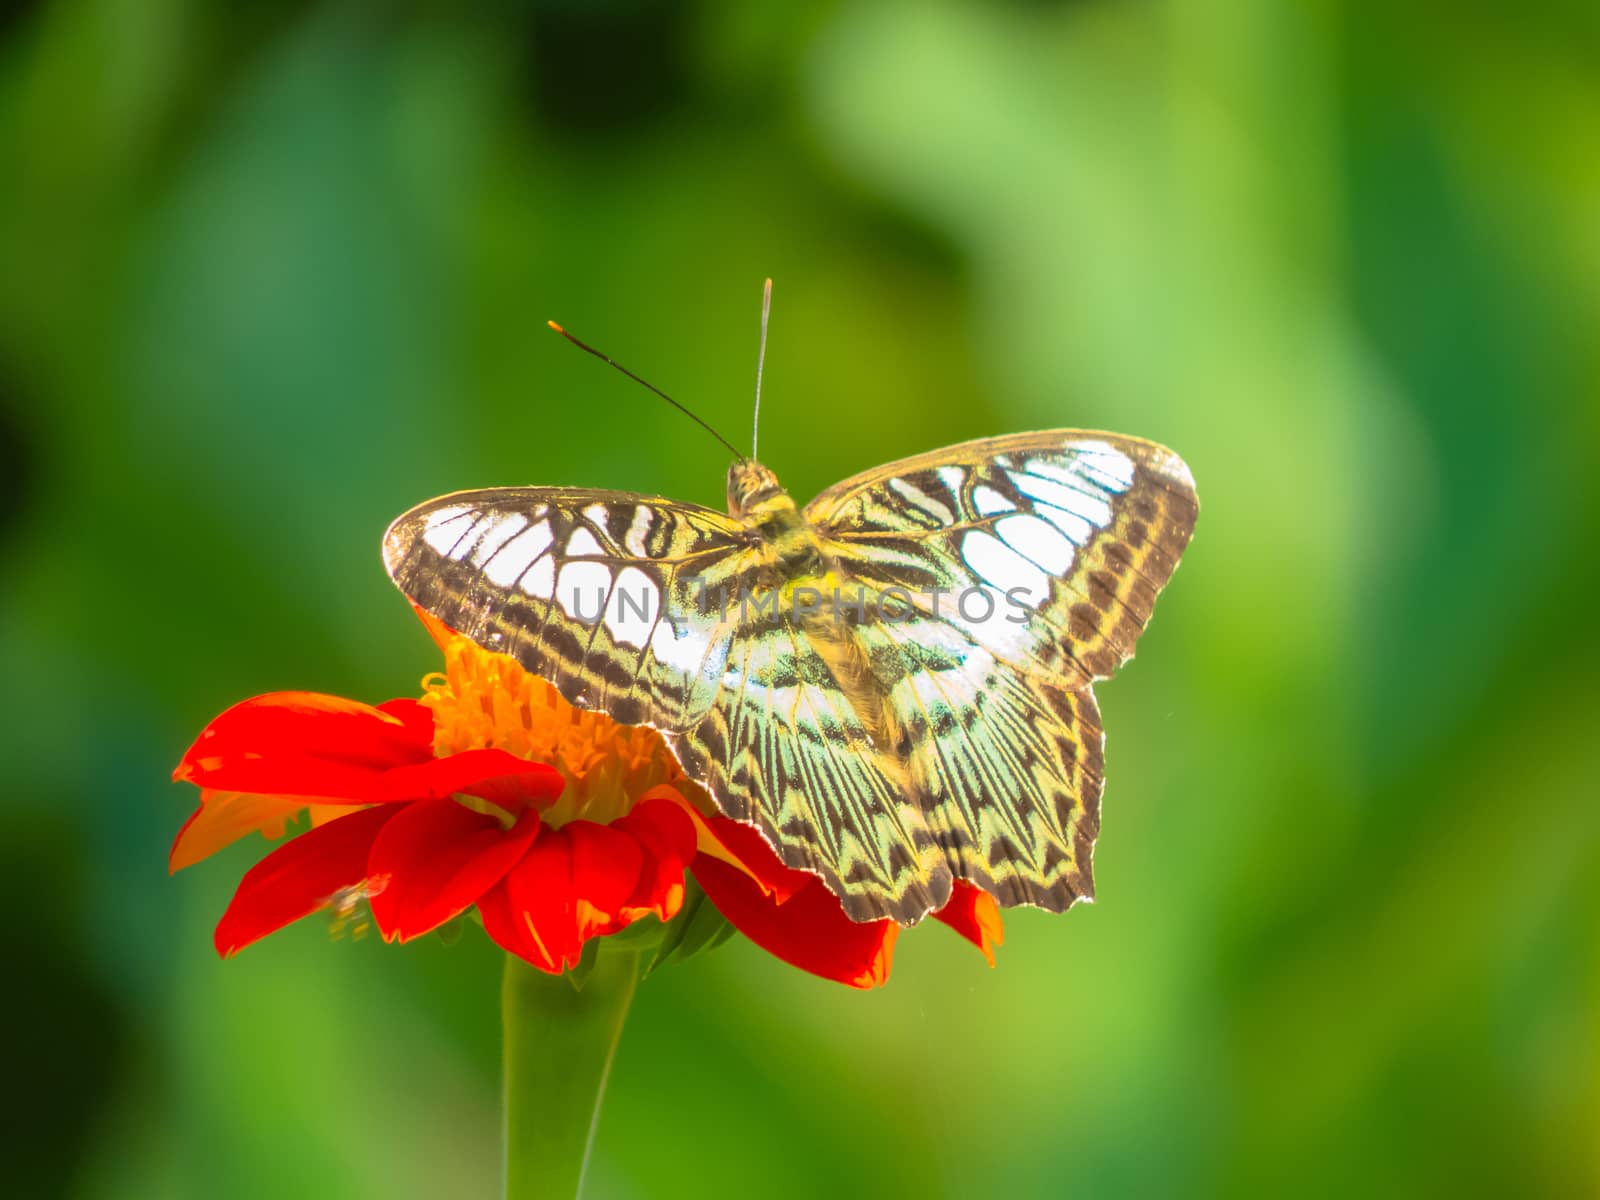 Clipper butterfly, Parthenos sylvia on Zinnia flower with green background.